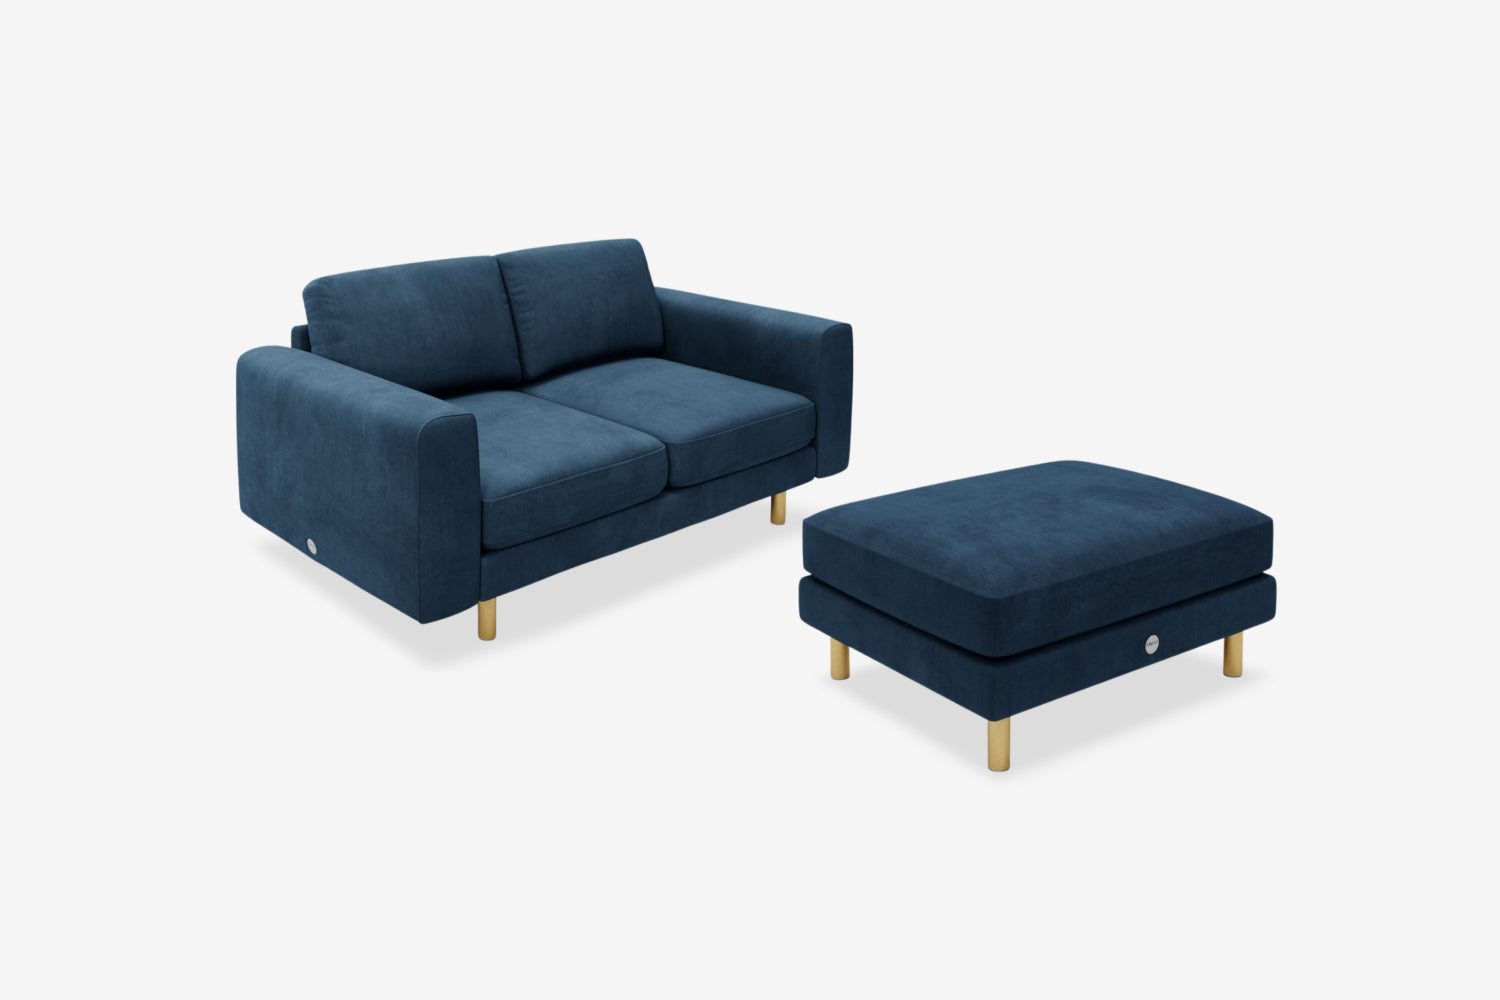 The Big Chill - 2 Seater Sofa and Footstool Set - Blue Steel